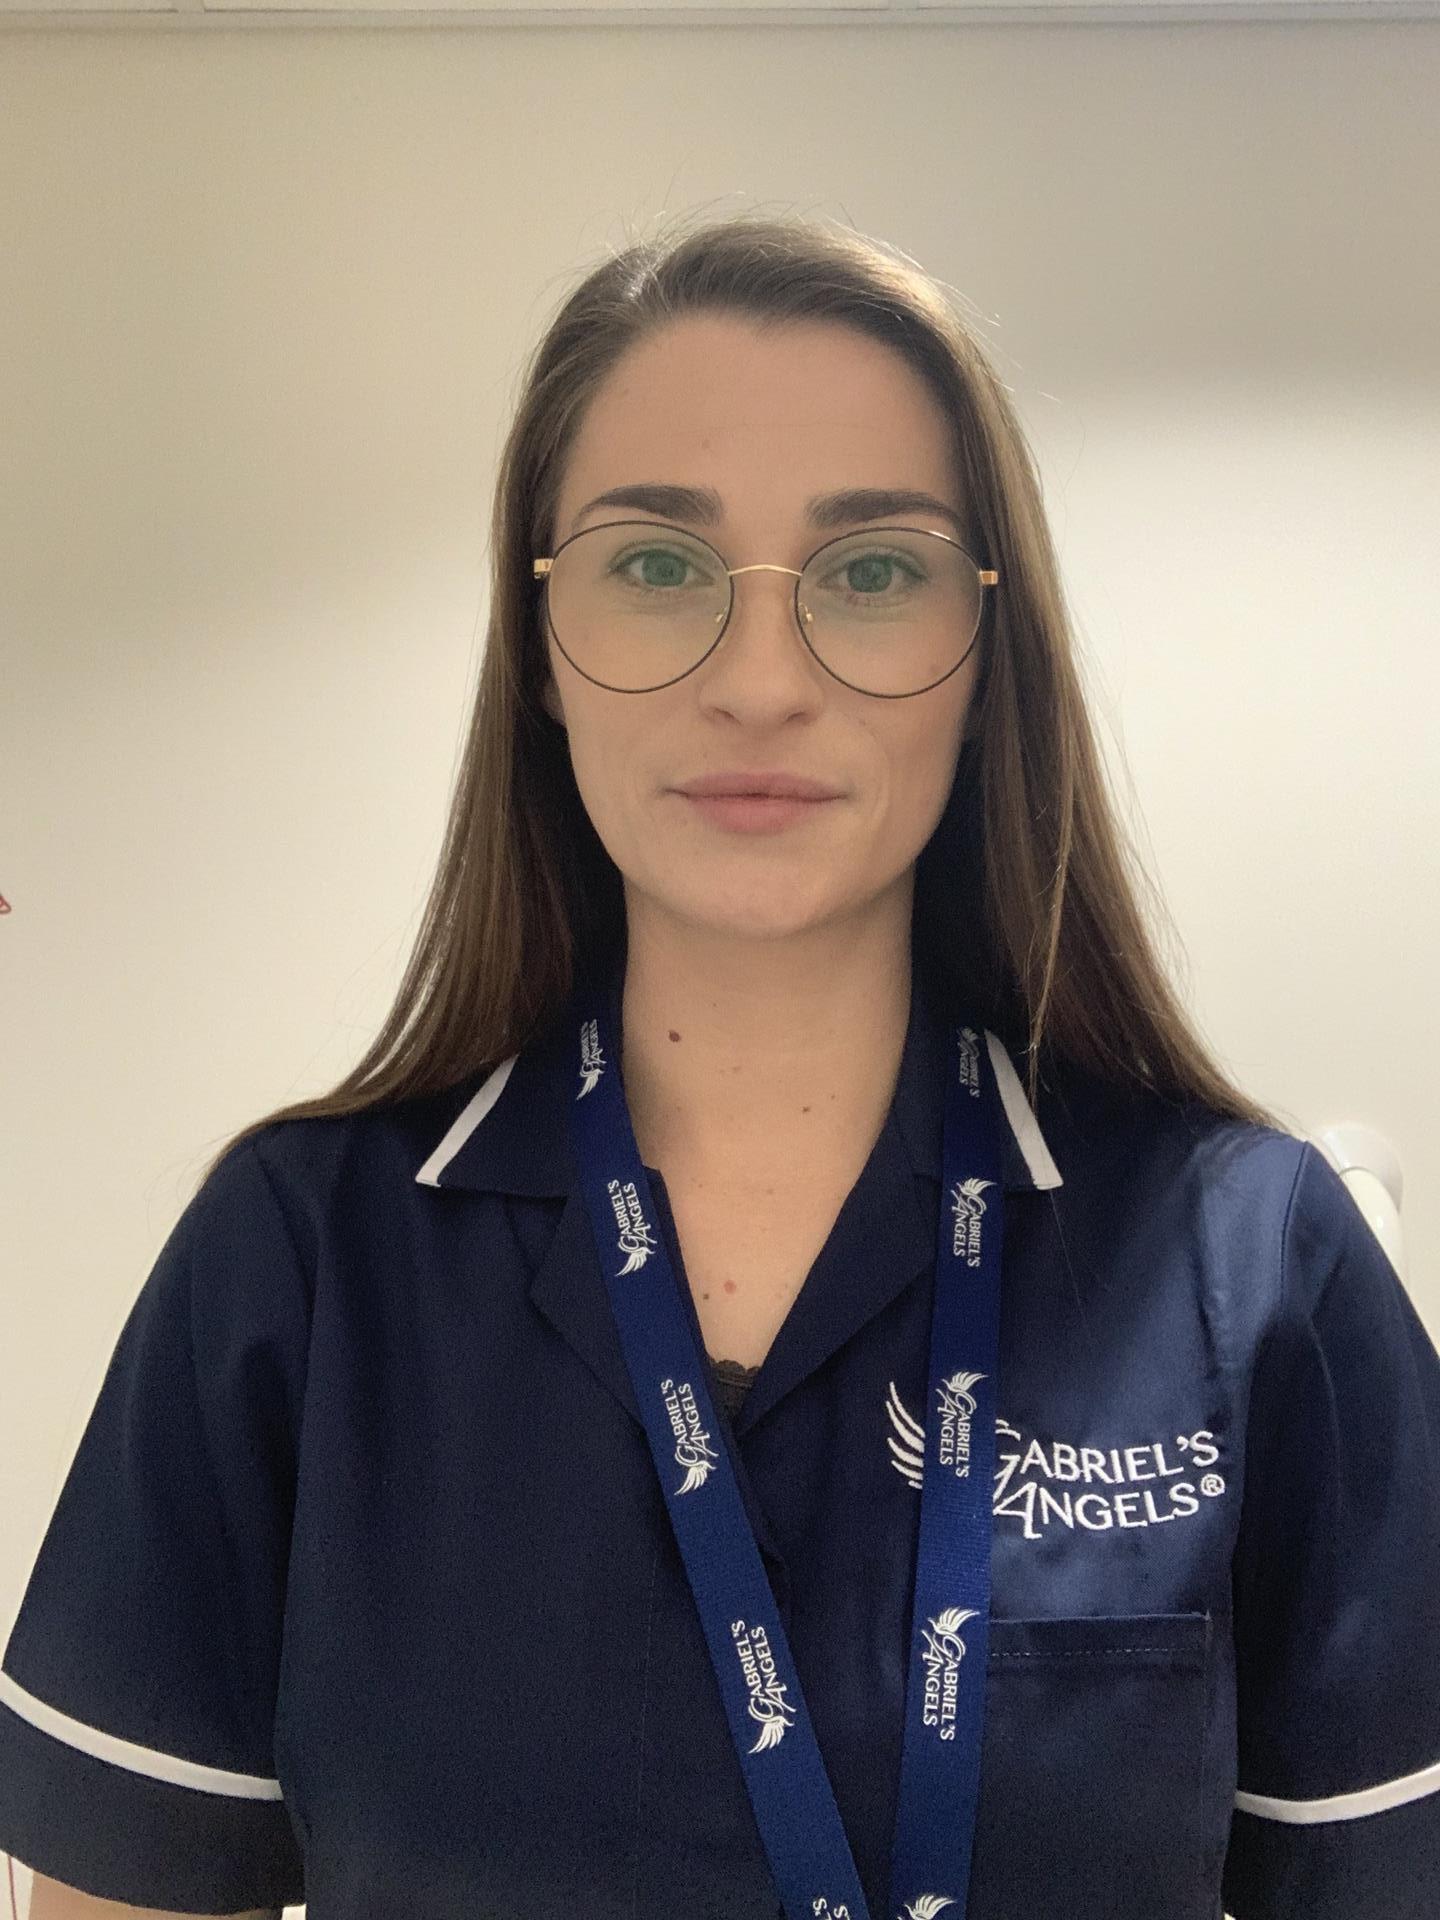 Georgia Duffy joins the Gabriel’s Angels family as a Care Manager